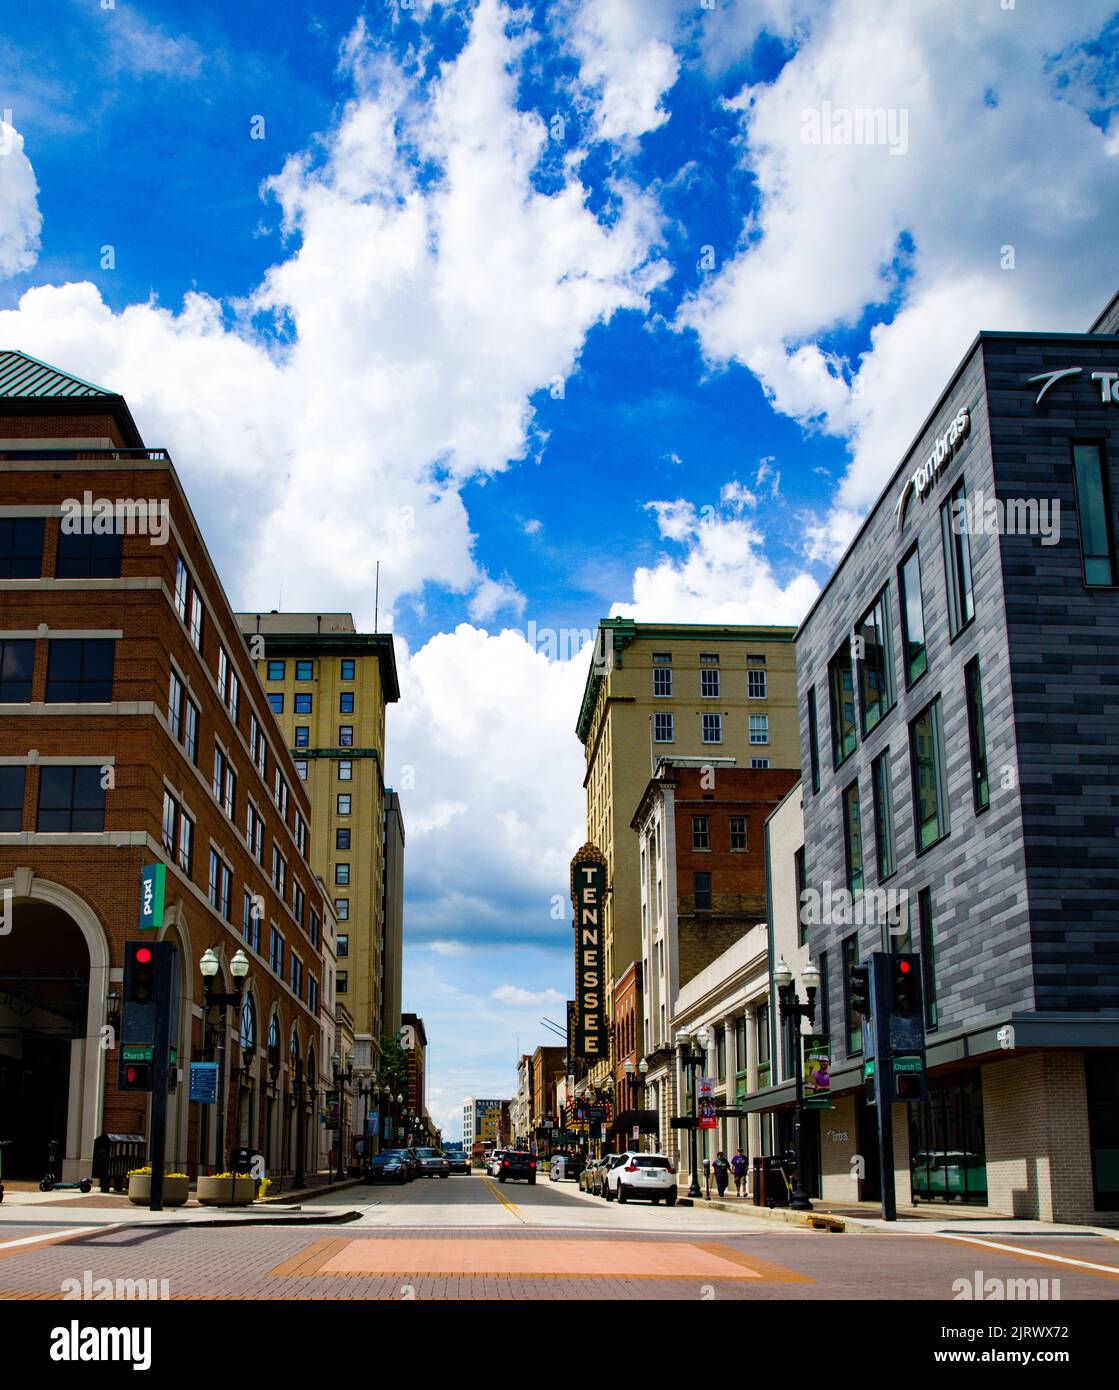 The Gay Street landscape in Downtown, Knoxville, Tennessee Stock Photo